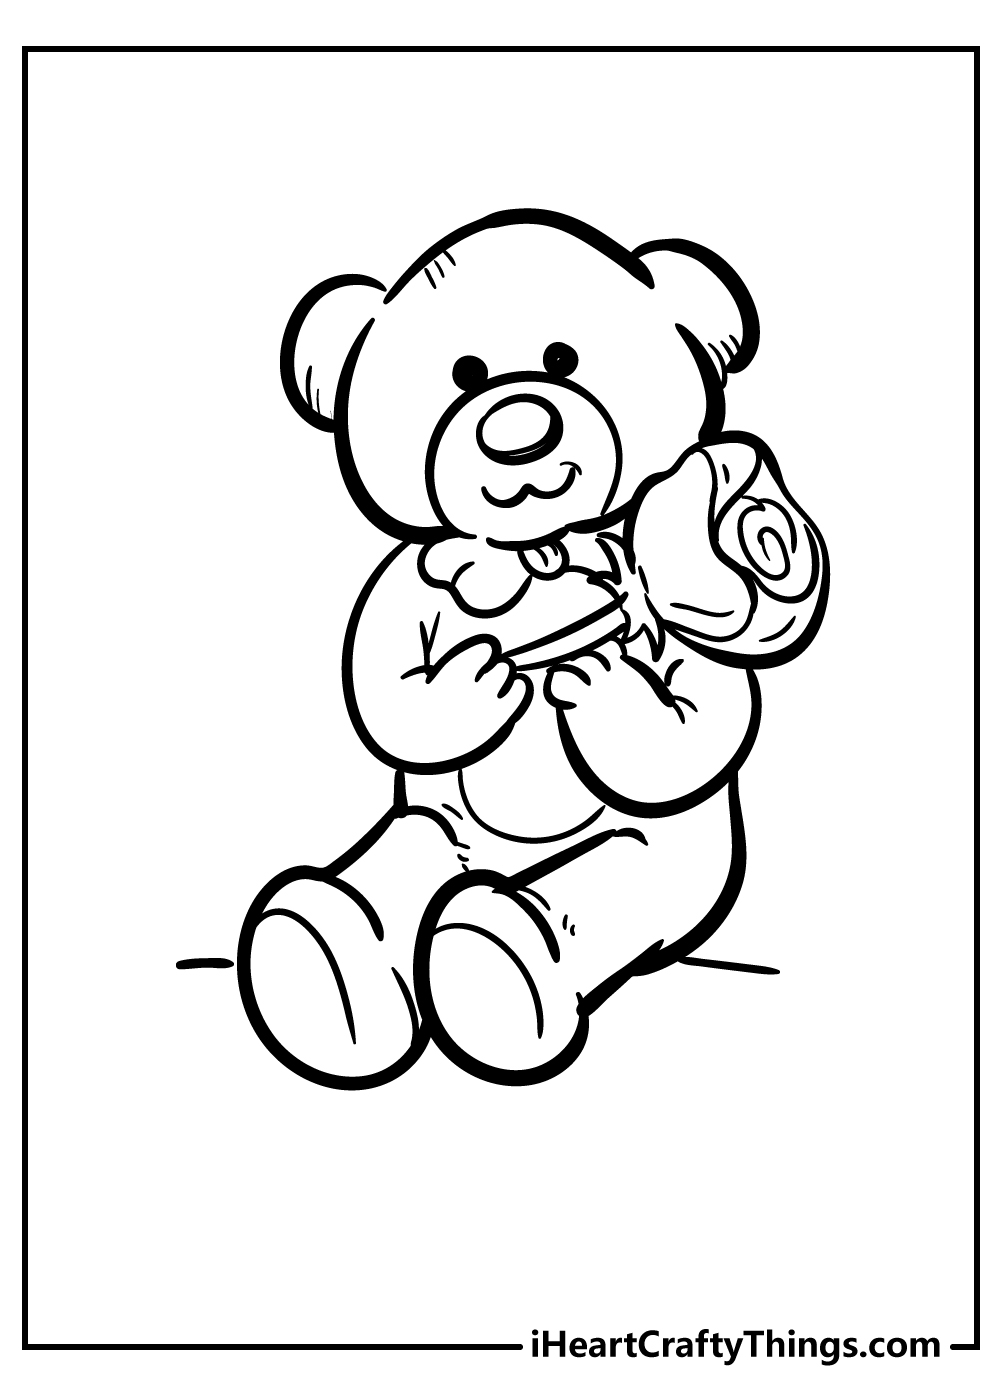 Teddy Bear Coloring Sheet for children free download